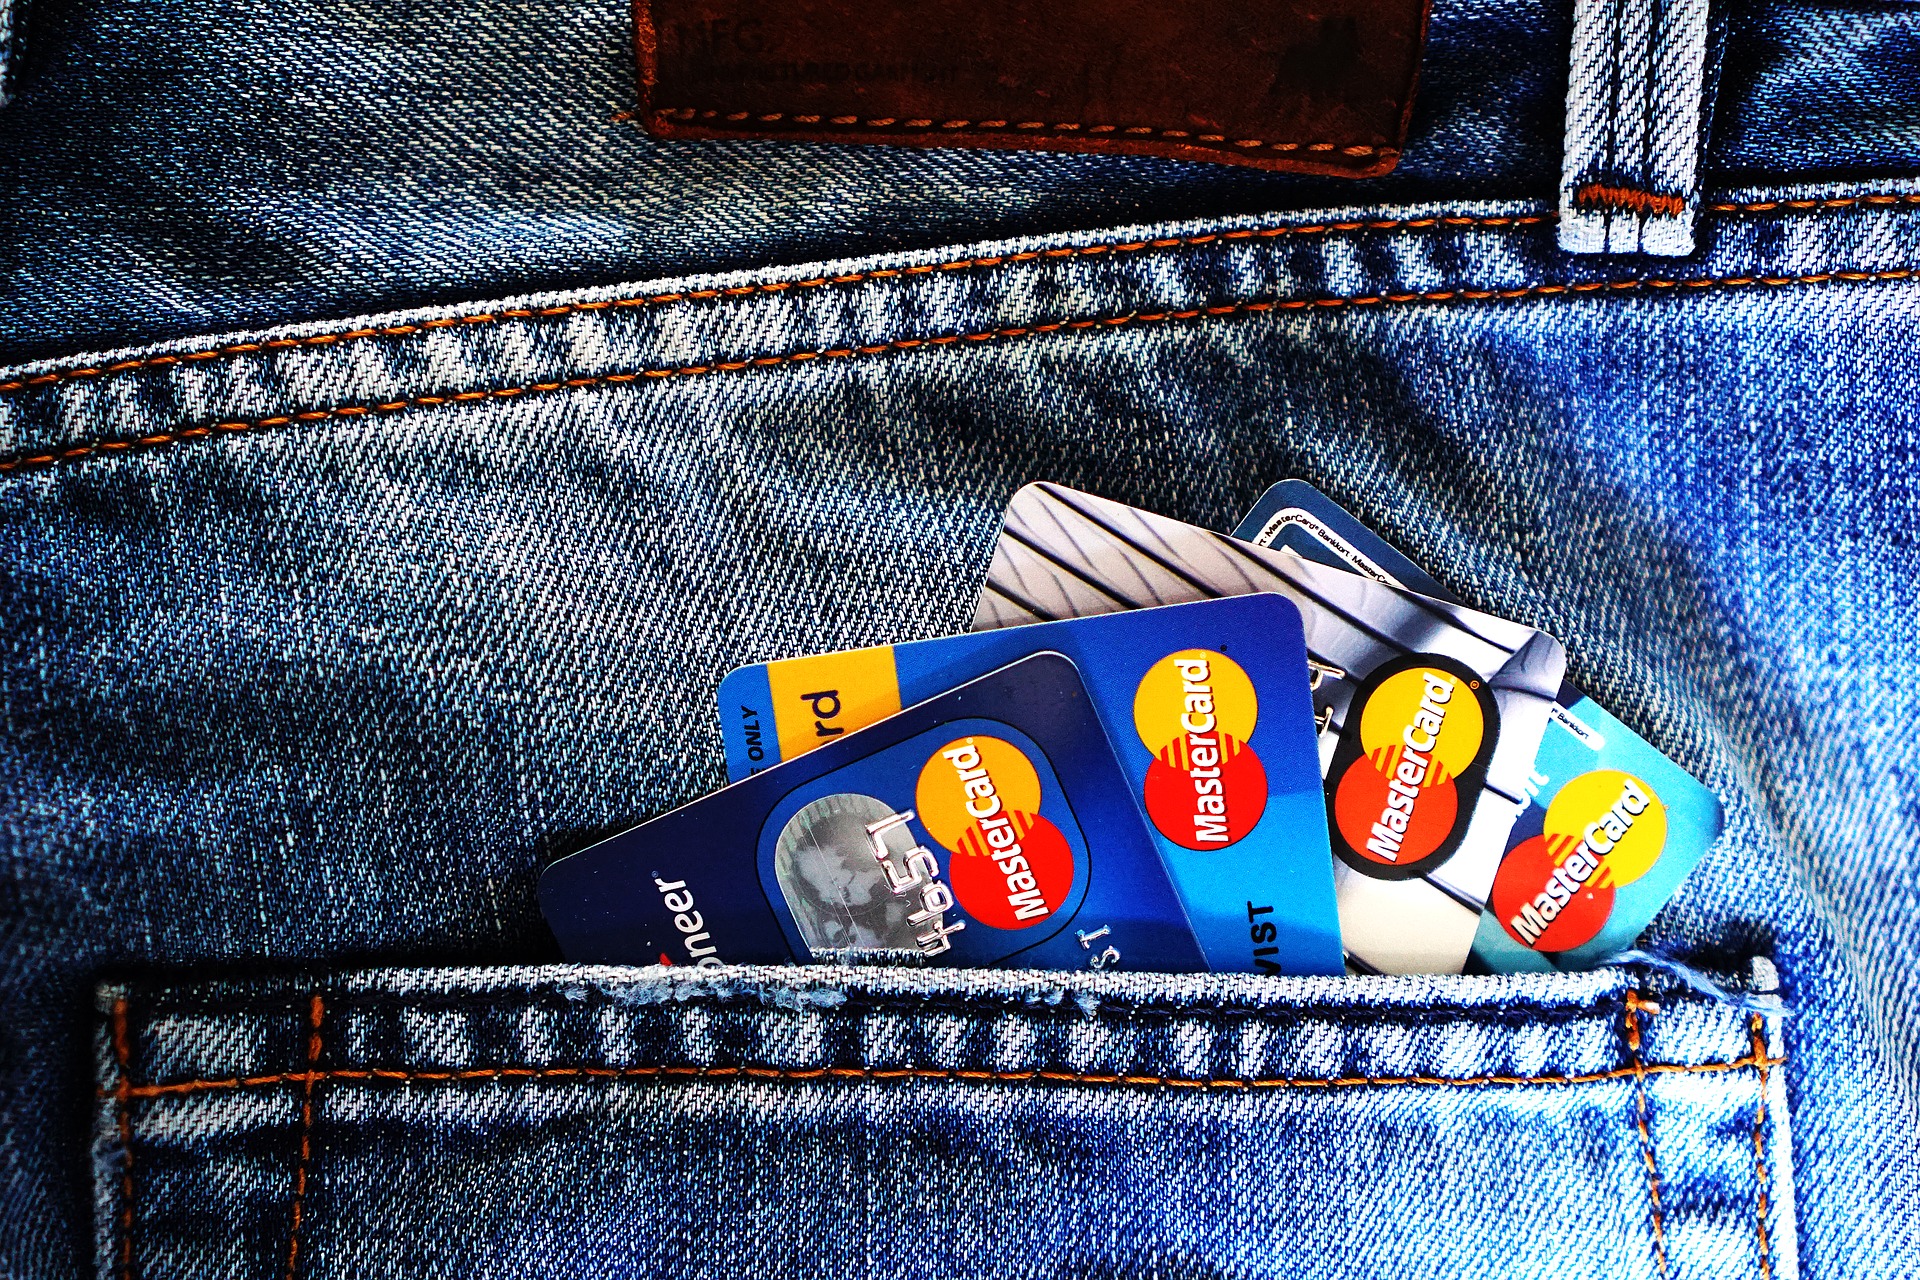 A number of Mastercard cards in a back pocket image cover